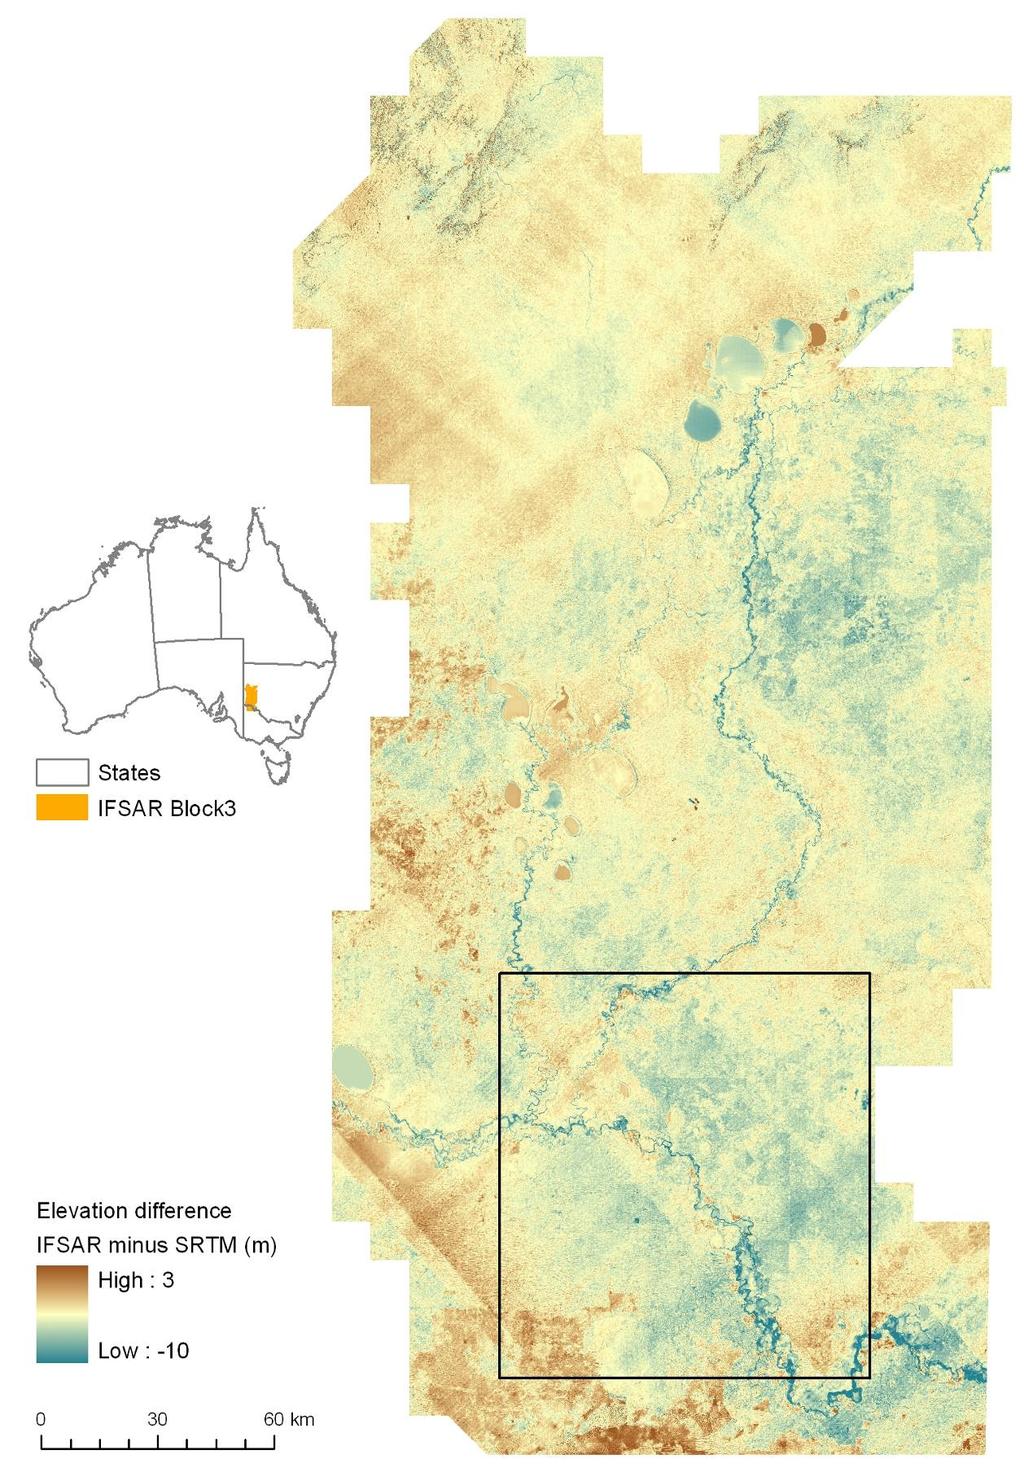 Figure 1. Elevation difference between the aggregated-ifsar DTM and reprojected-srtm DEM.